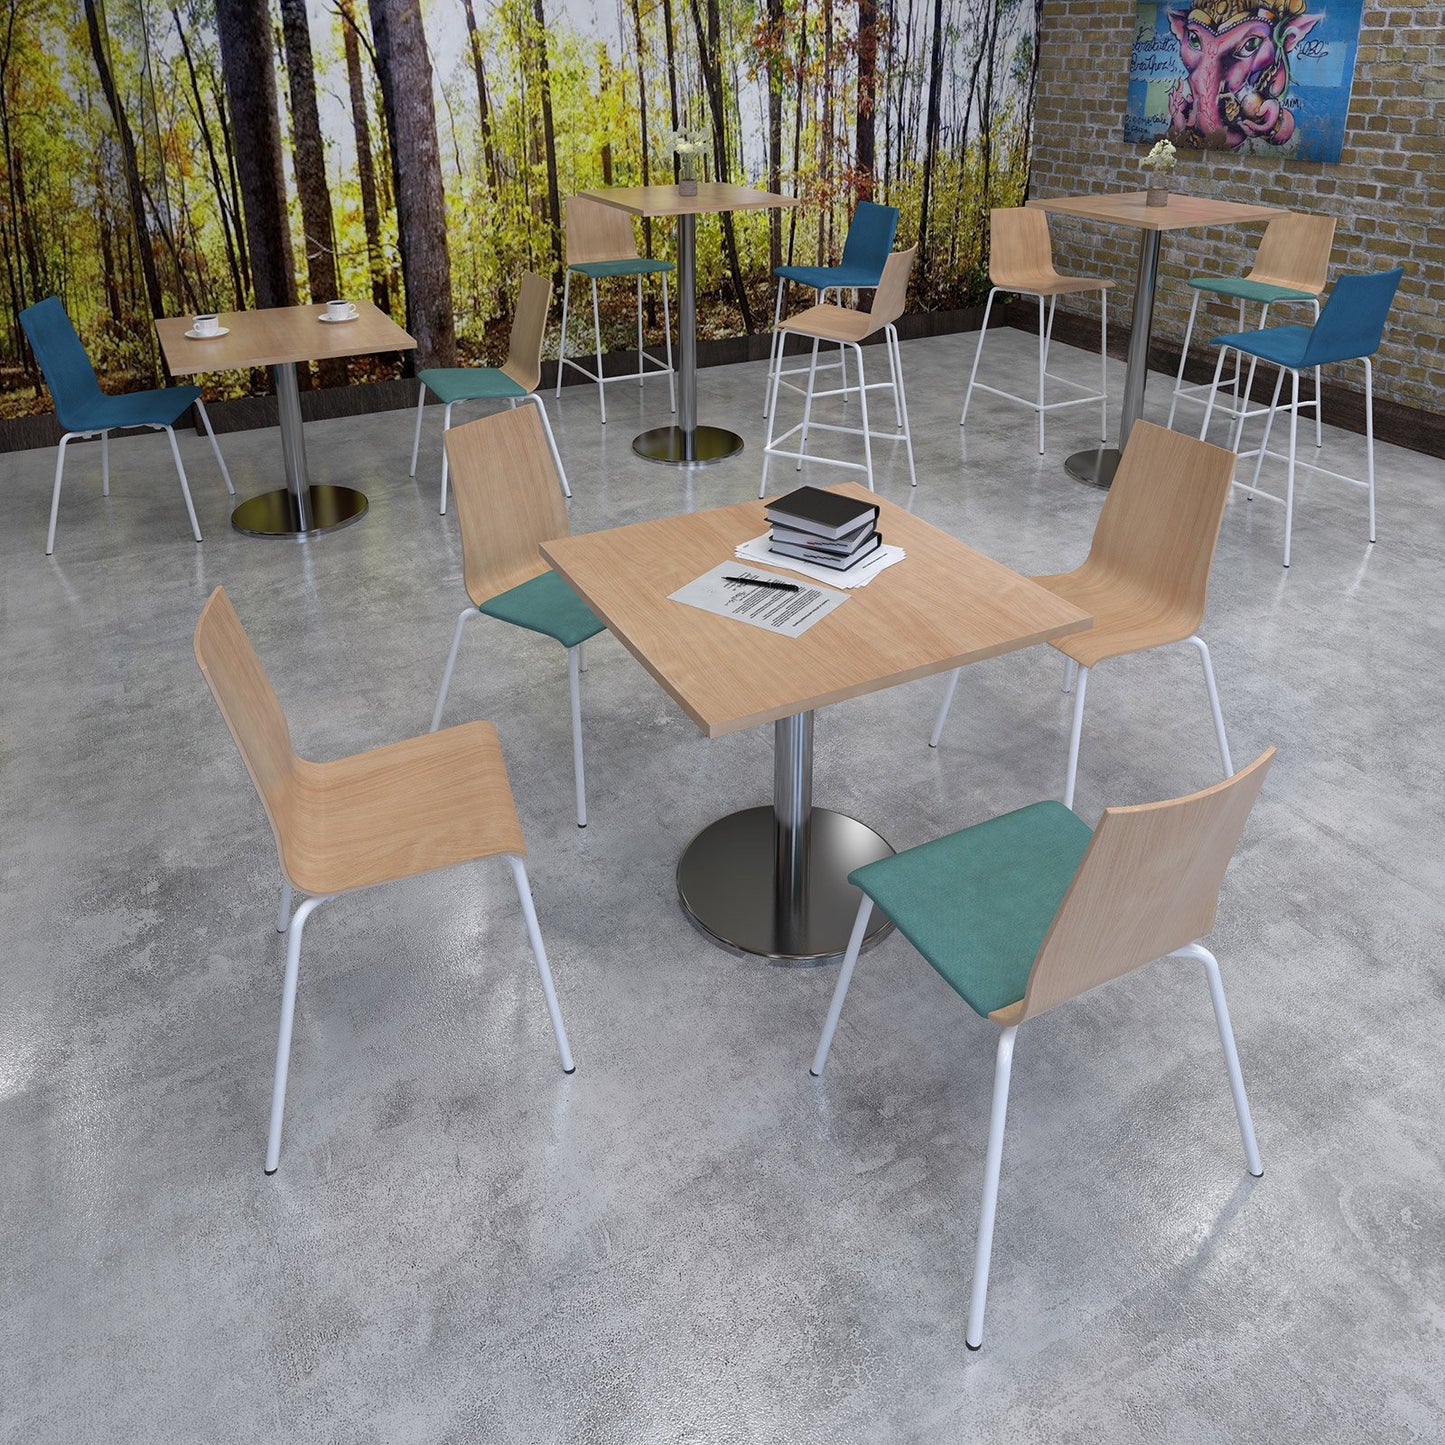 Pisa circular dining table with round base